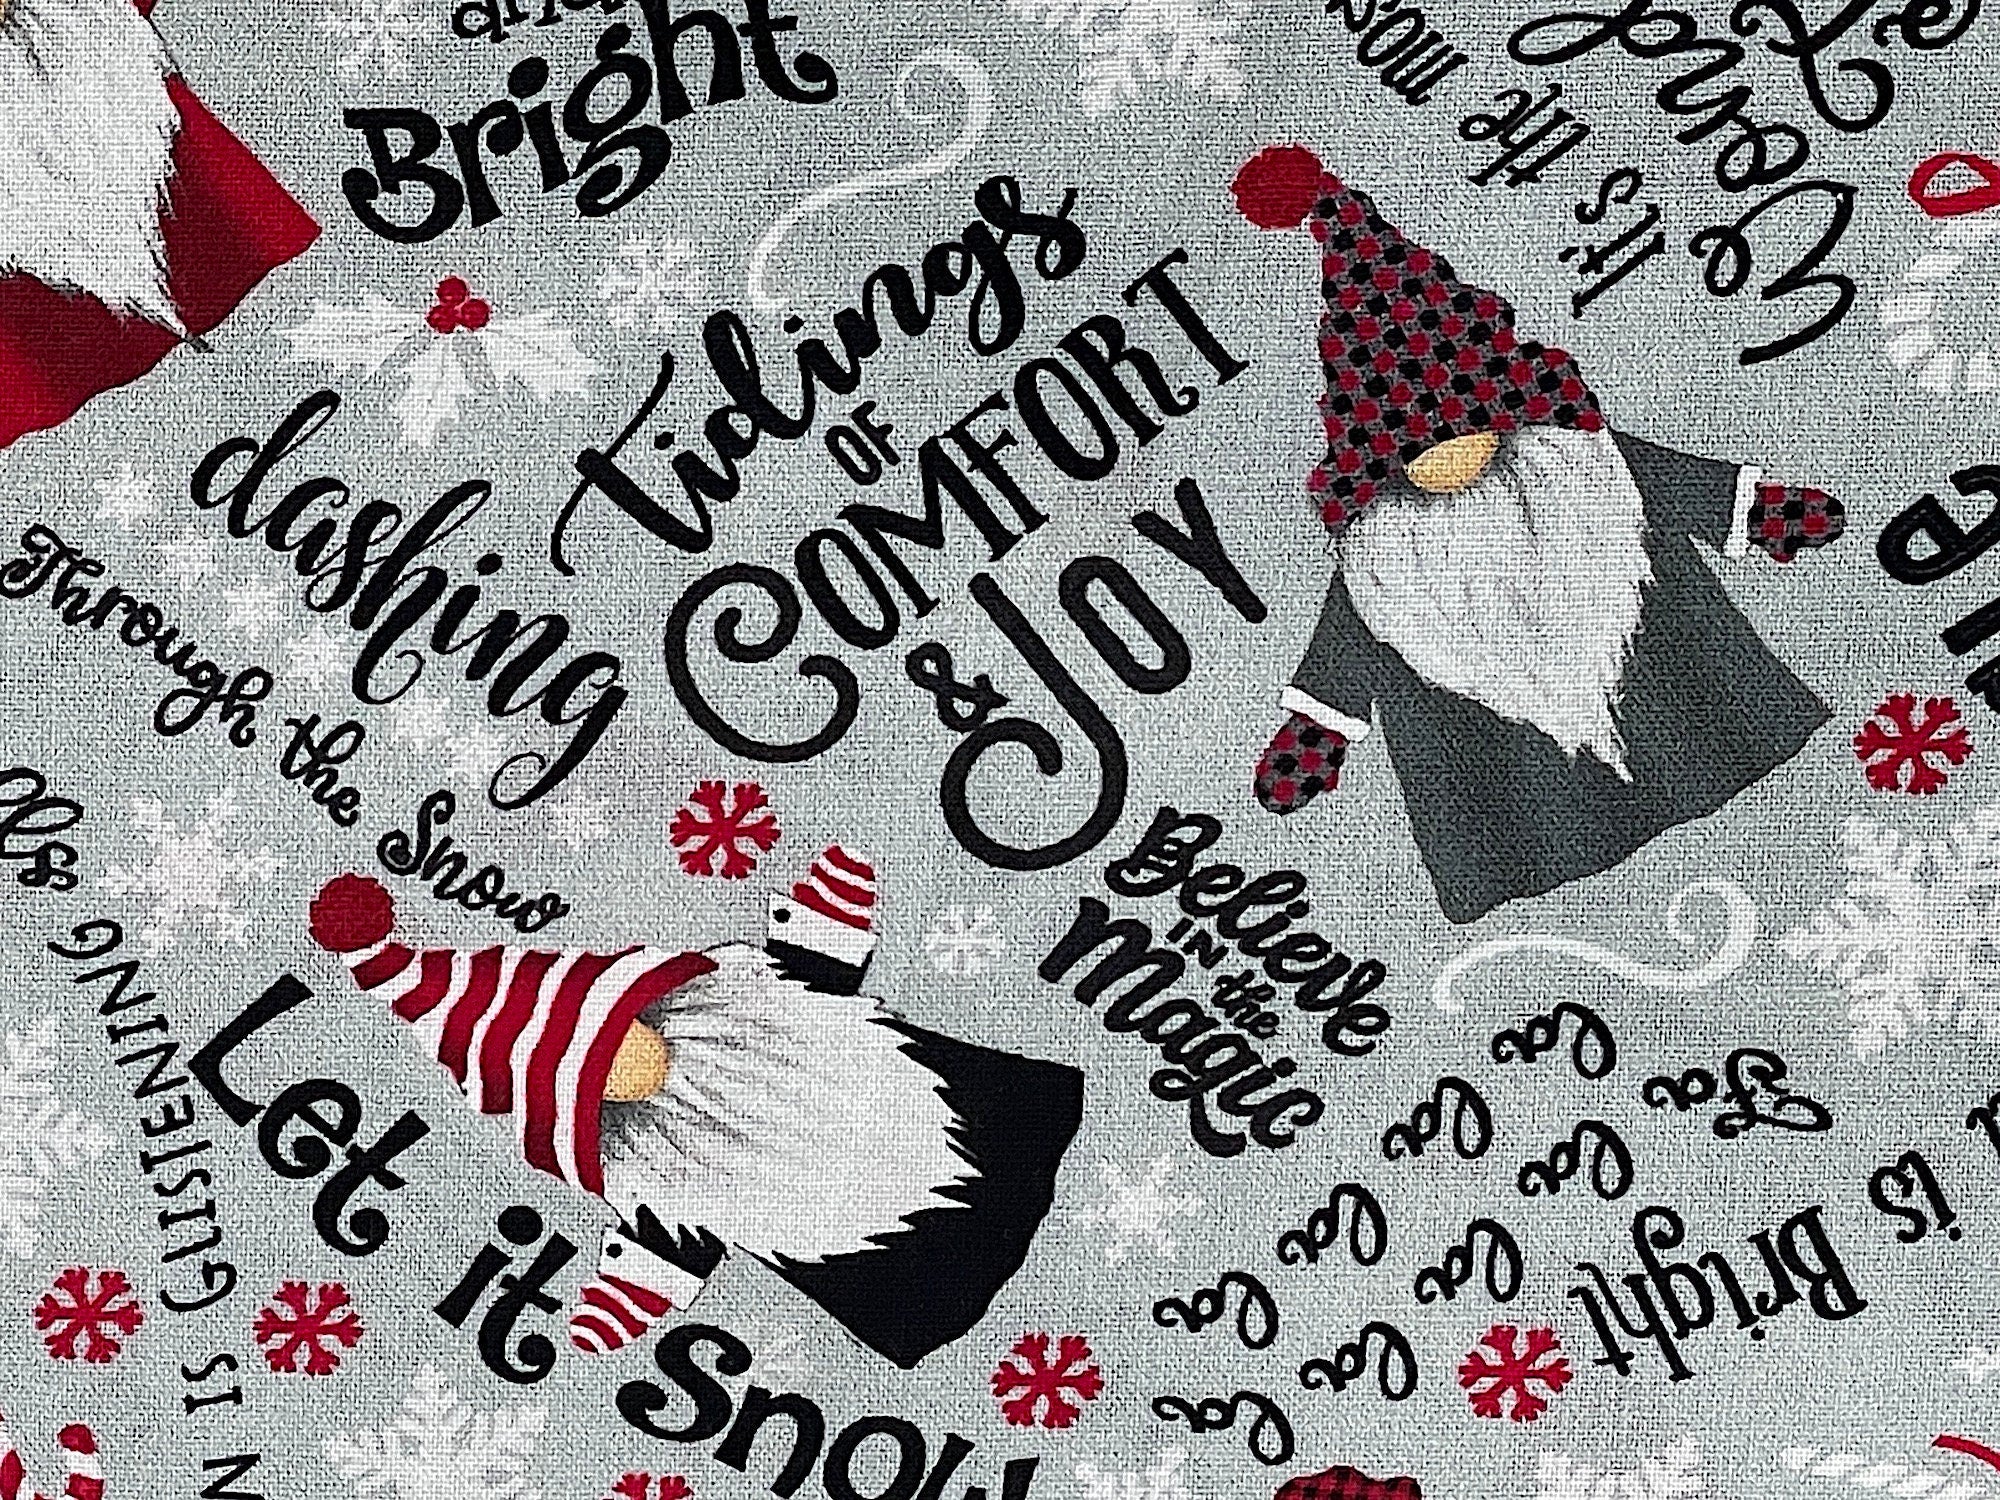 Close up of gnomes and sayings such as tidings of comfort & joy, believe in magic and more.